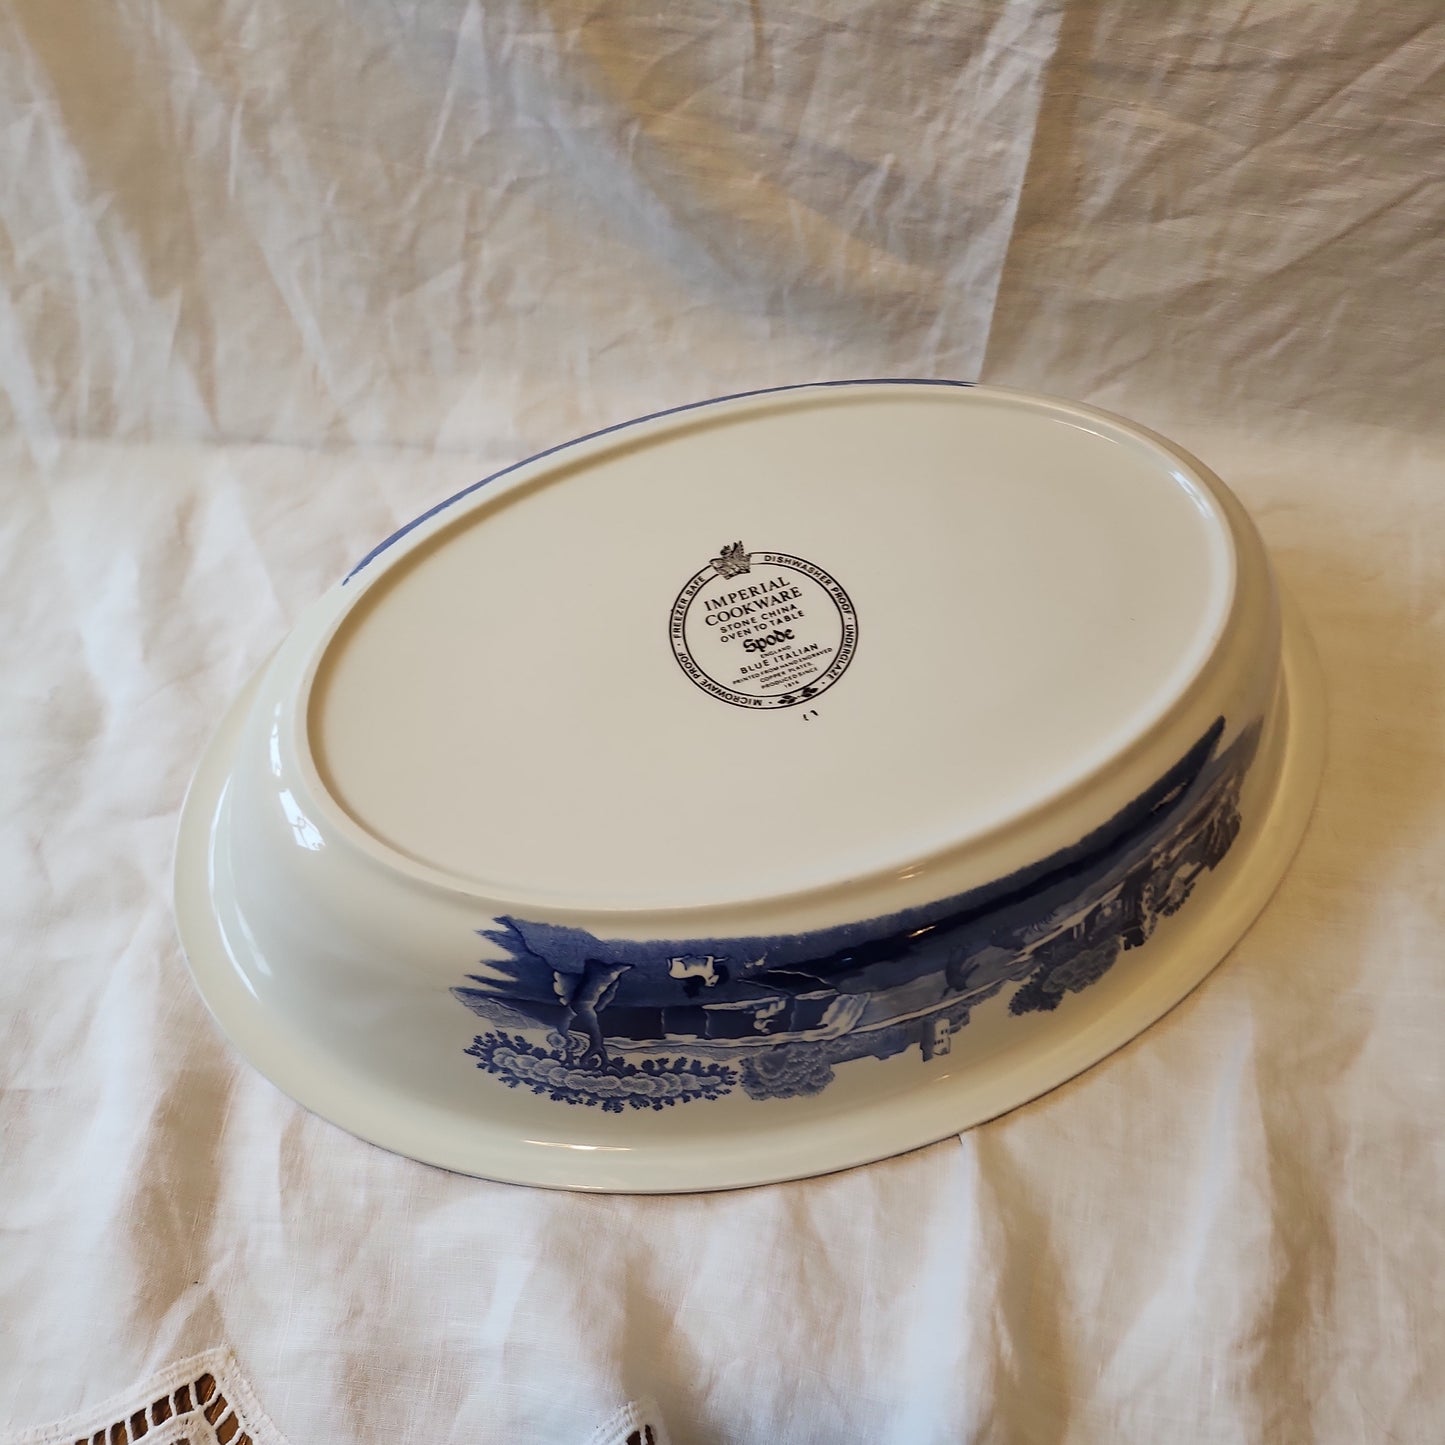 Rare Spode Imperial cookware oven to table oval serving dish